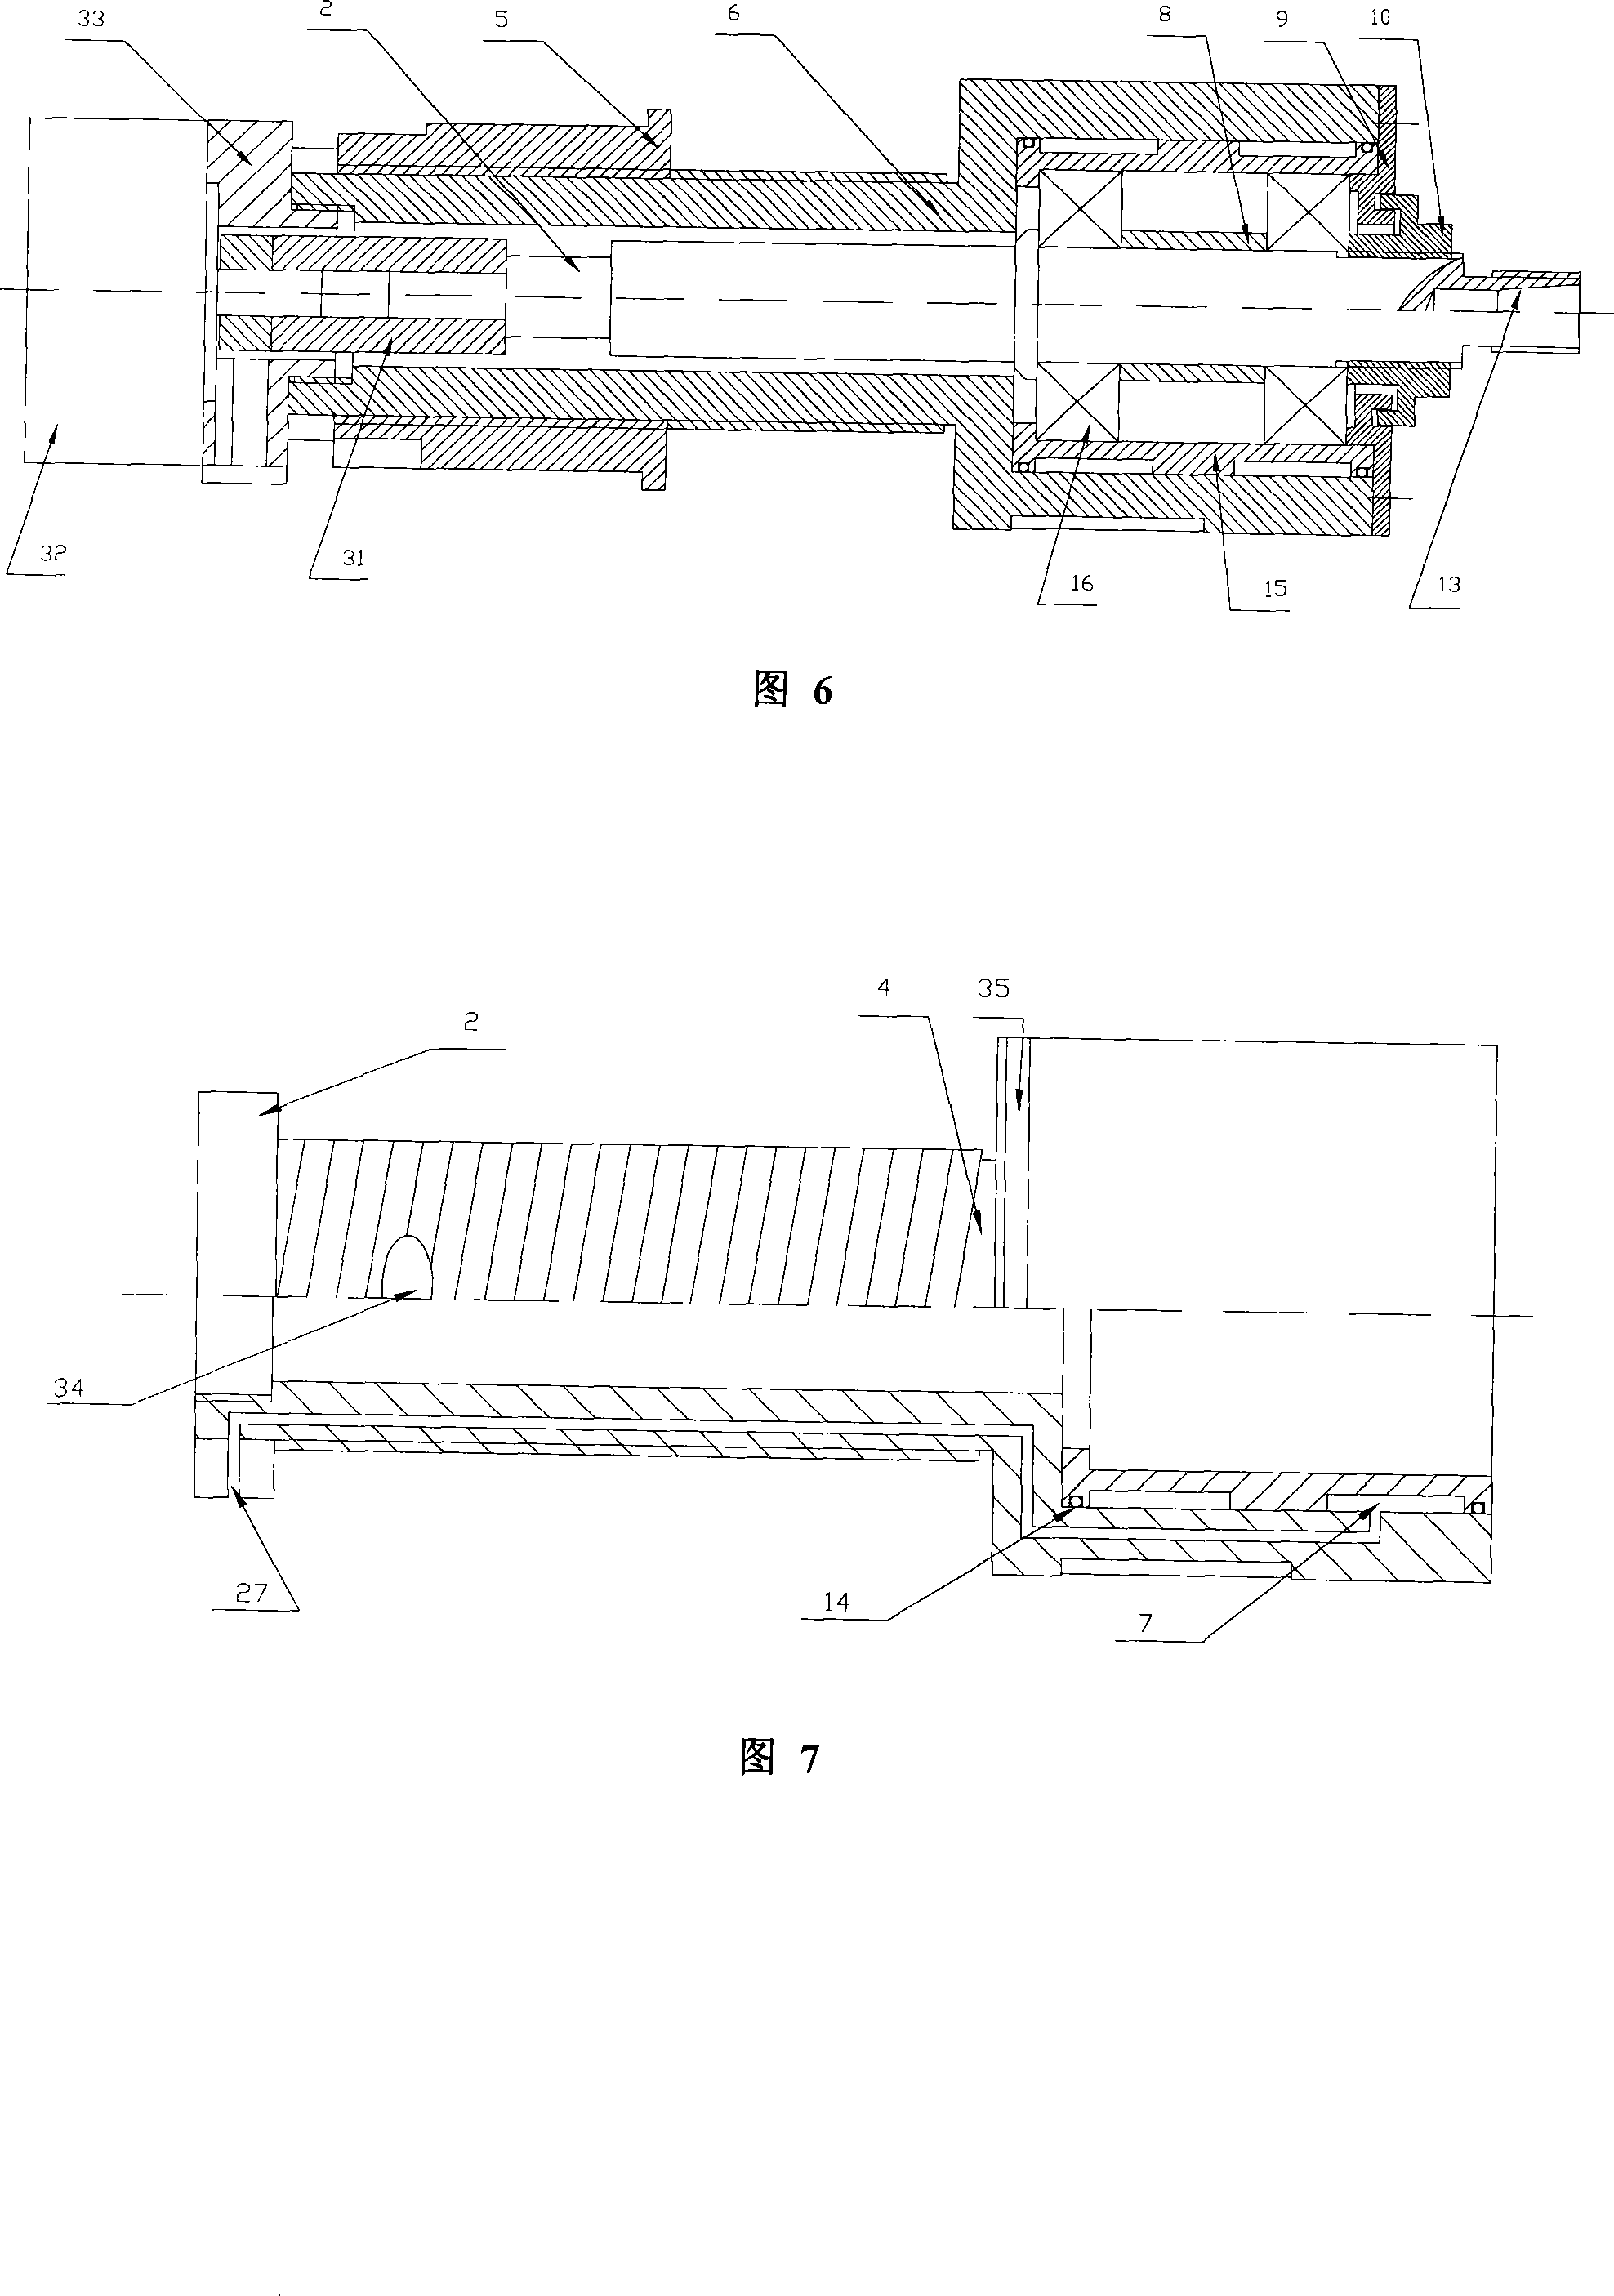 Carving head with feed motion